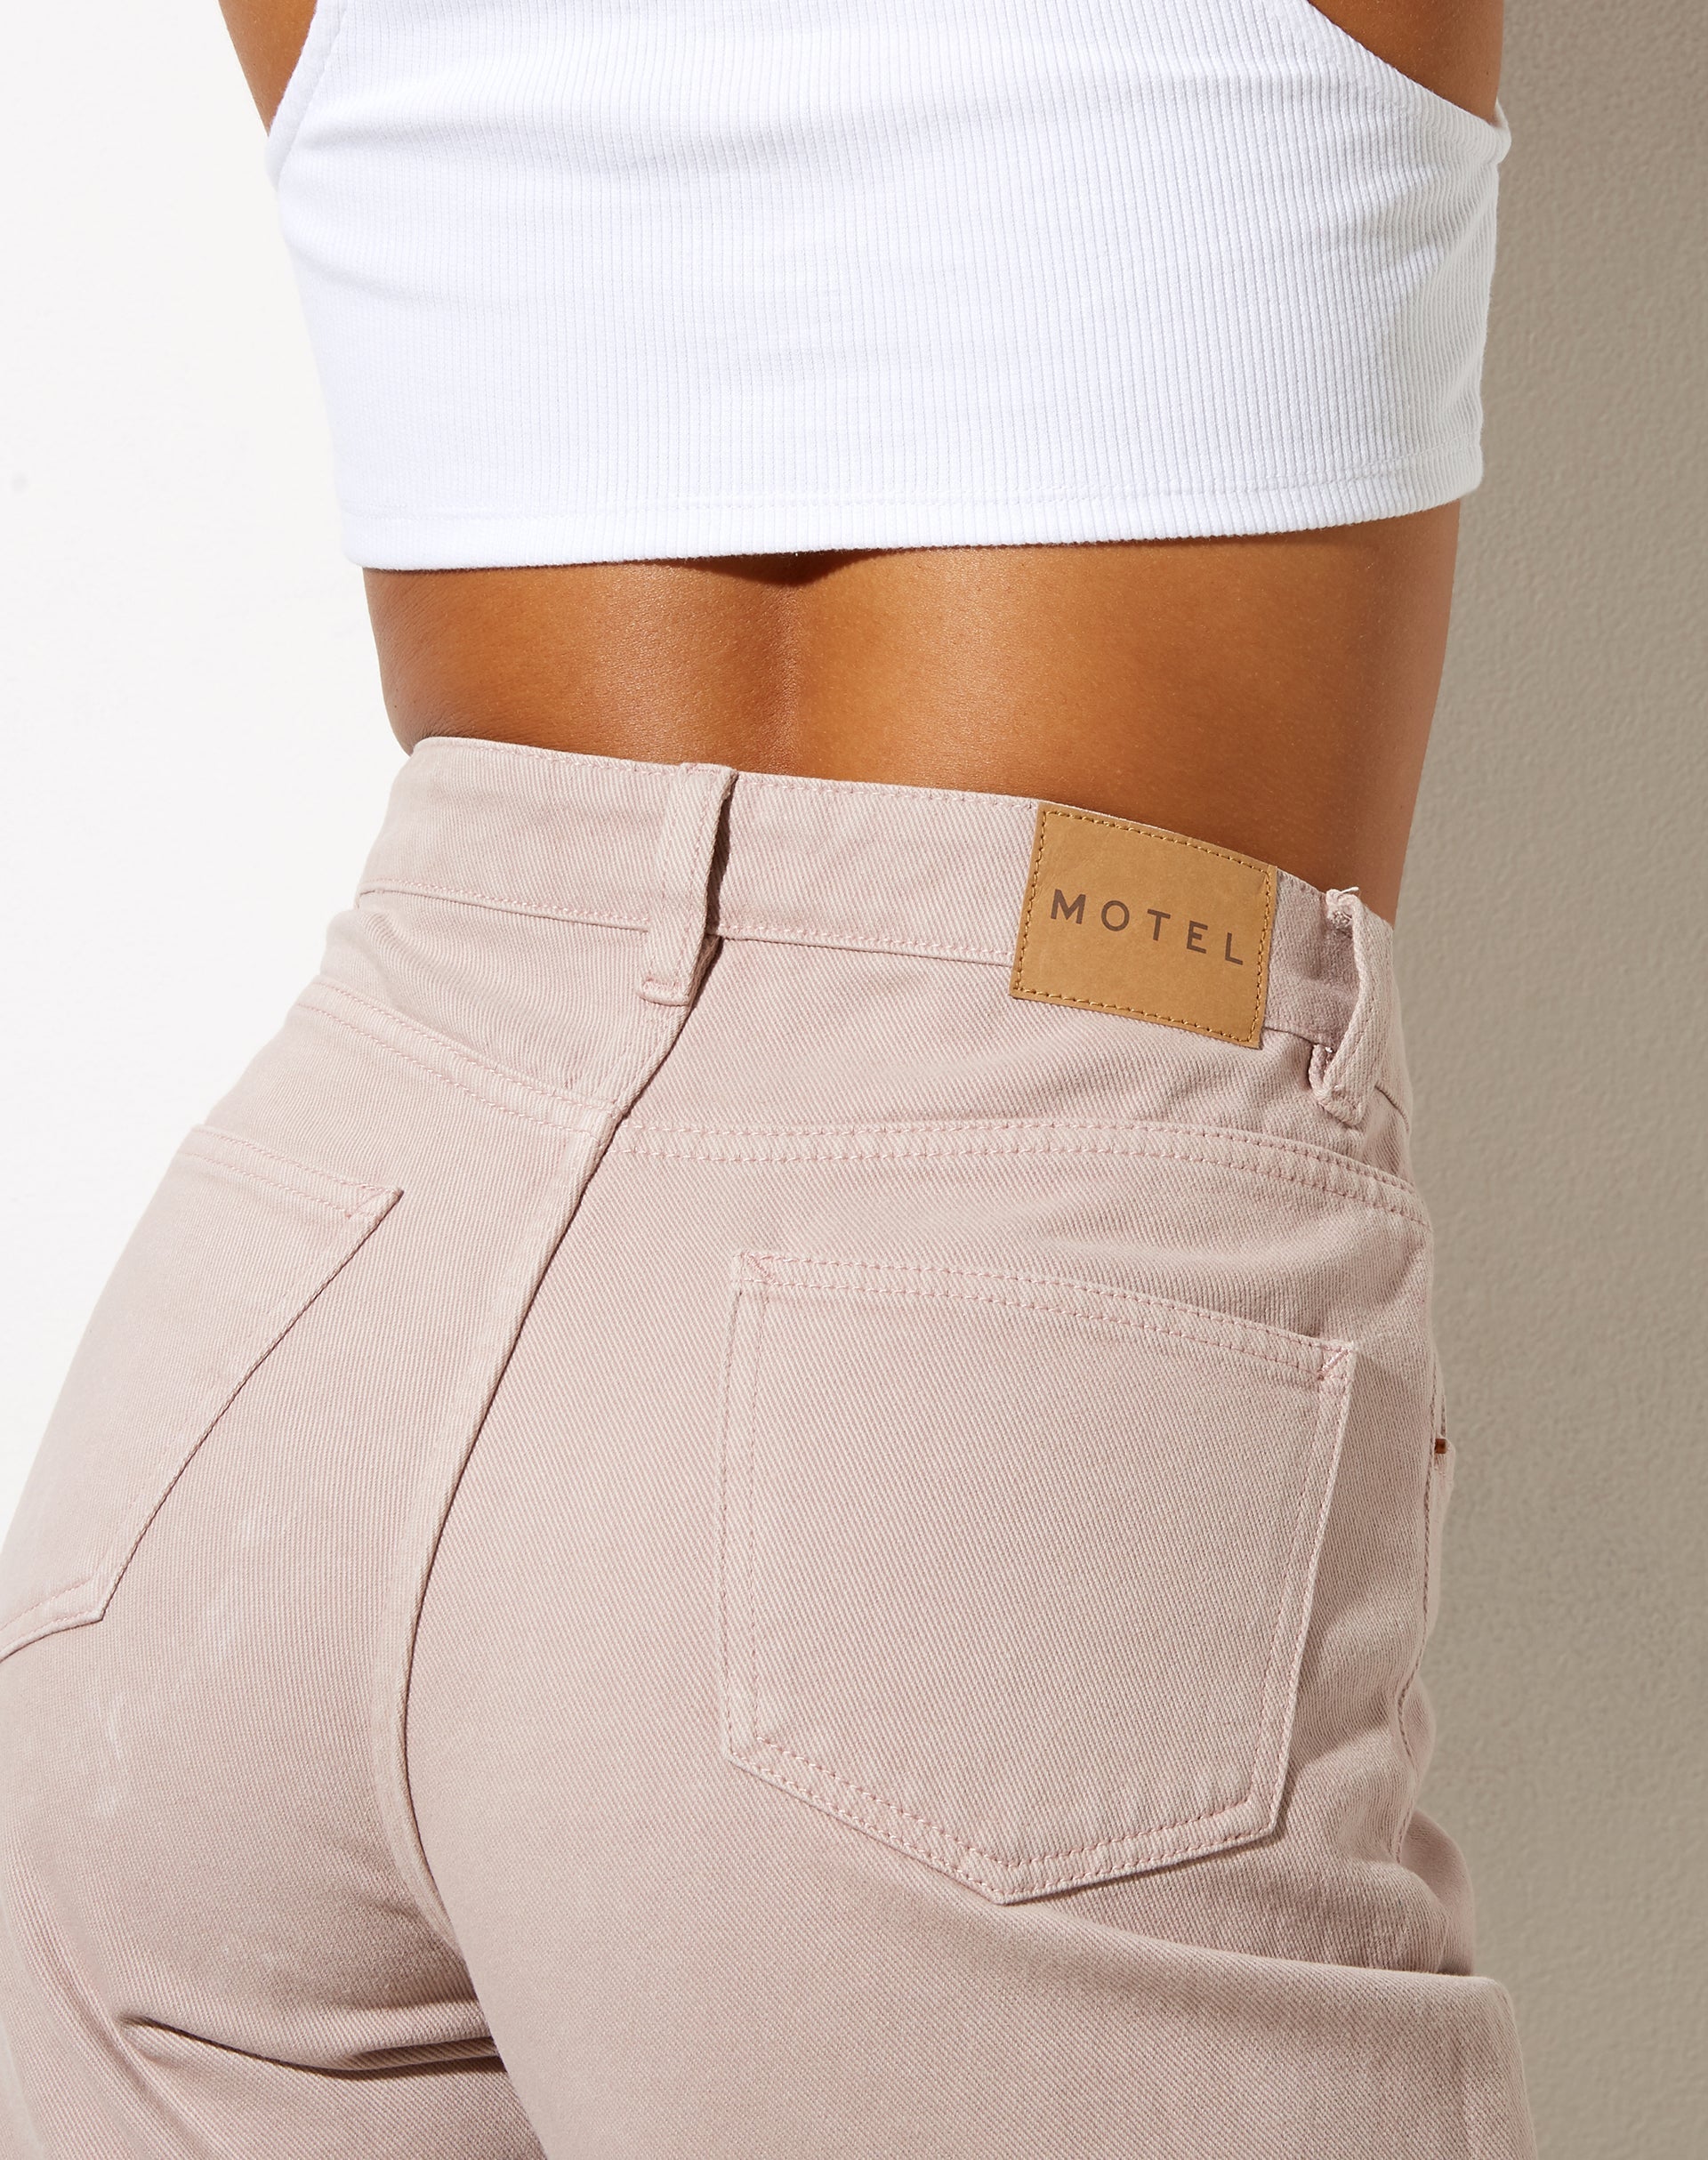 Parallel Jeans in Washed Lilac